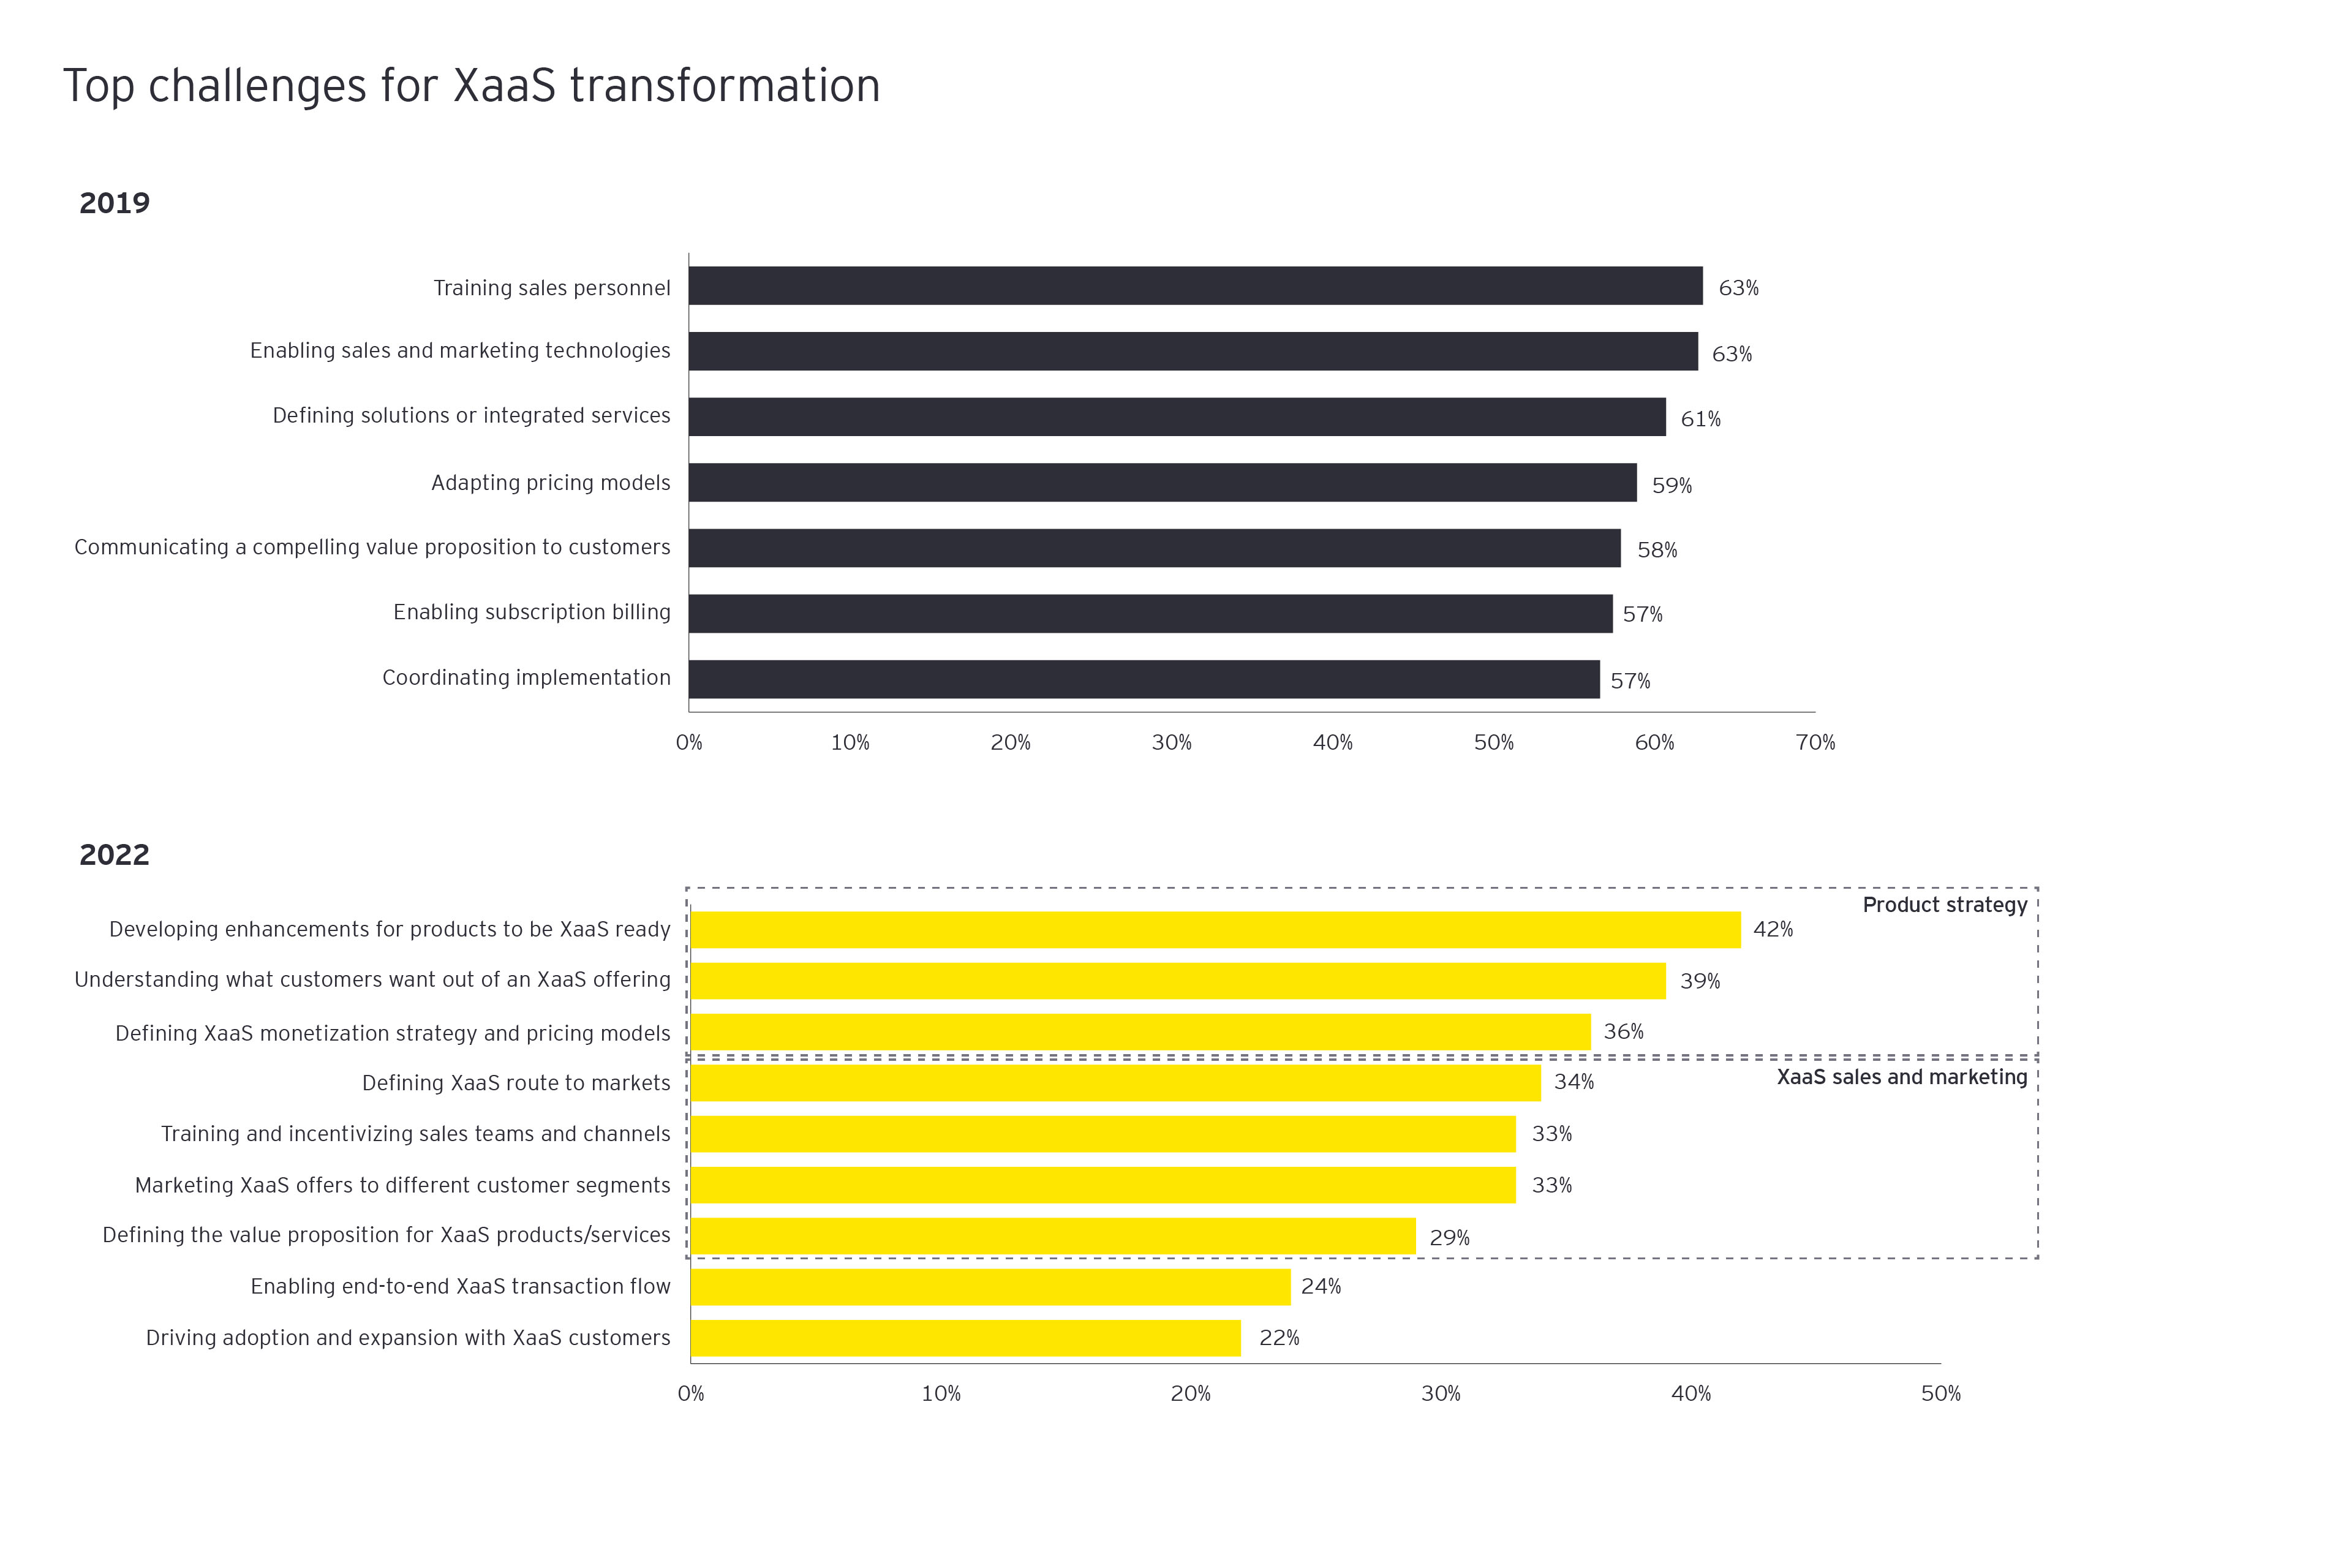 Top challenges for XaaS transformation